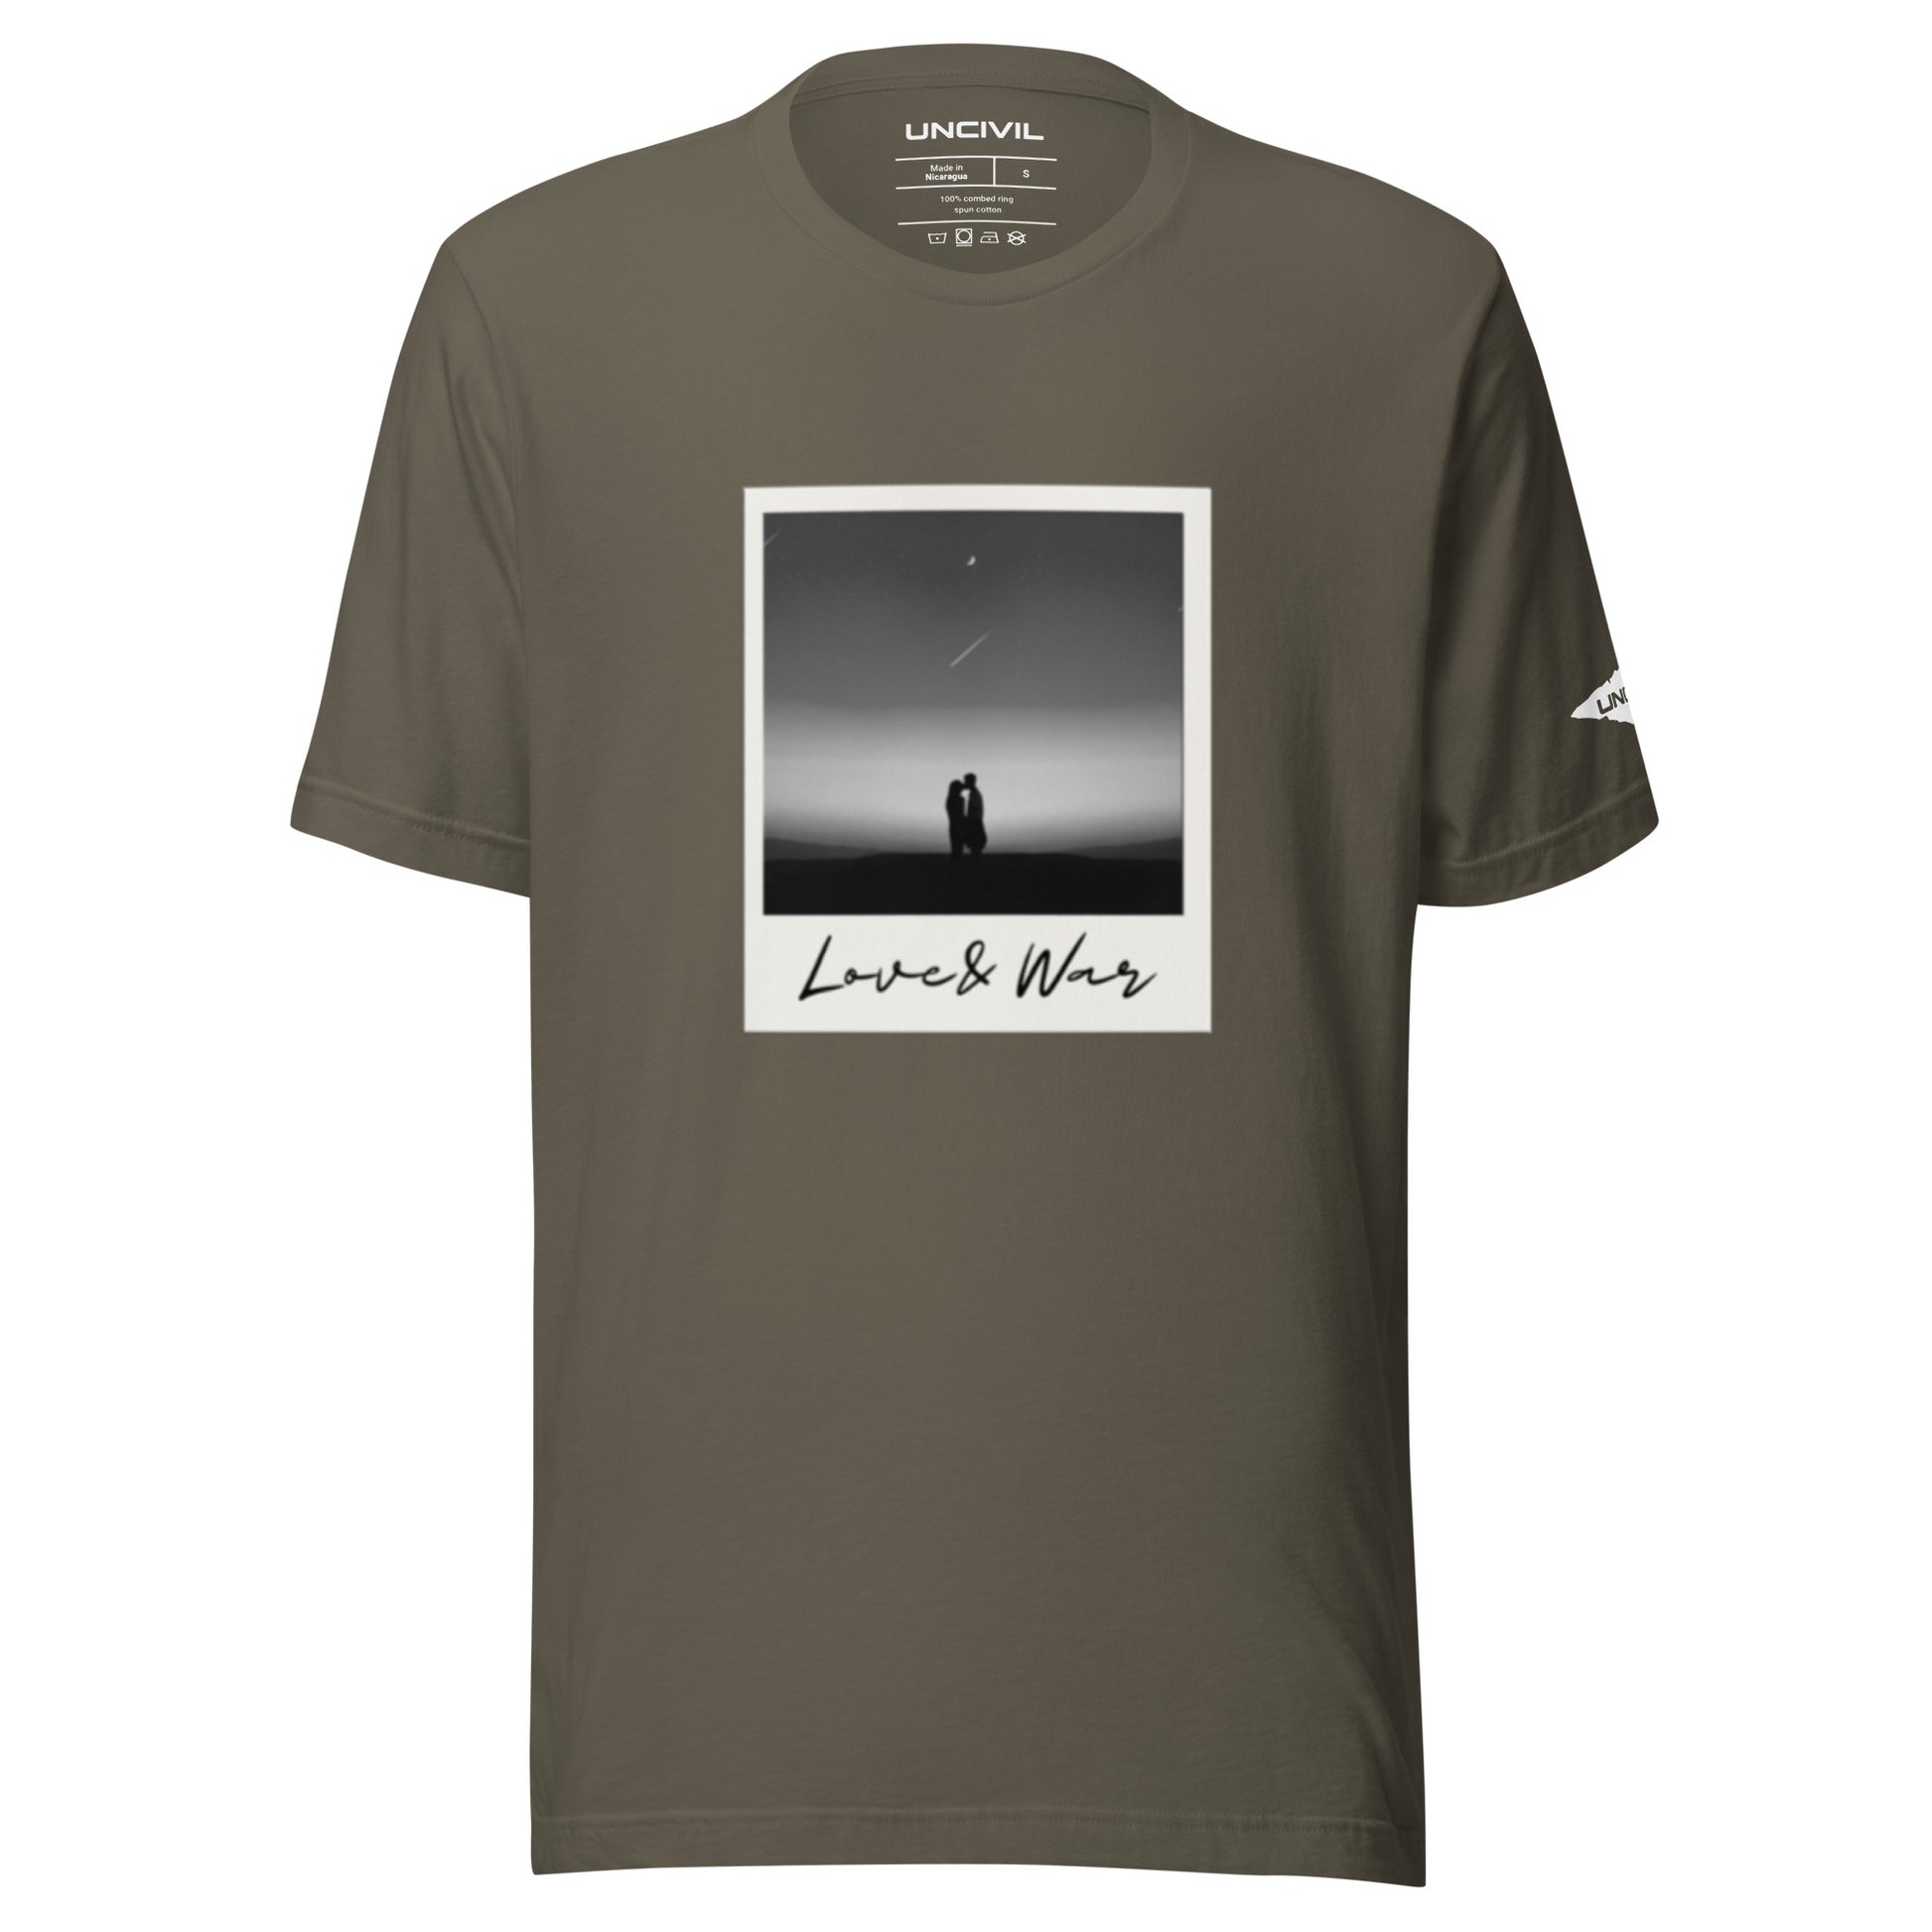 Love and War shirt. Featuring a Polaroid photo of a couple in black and white. Army Green unisex shirt.